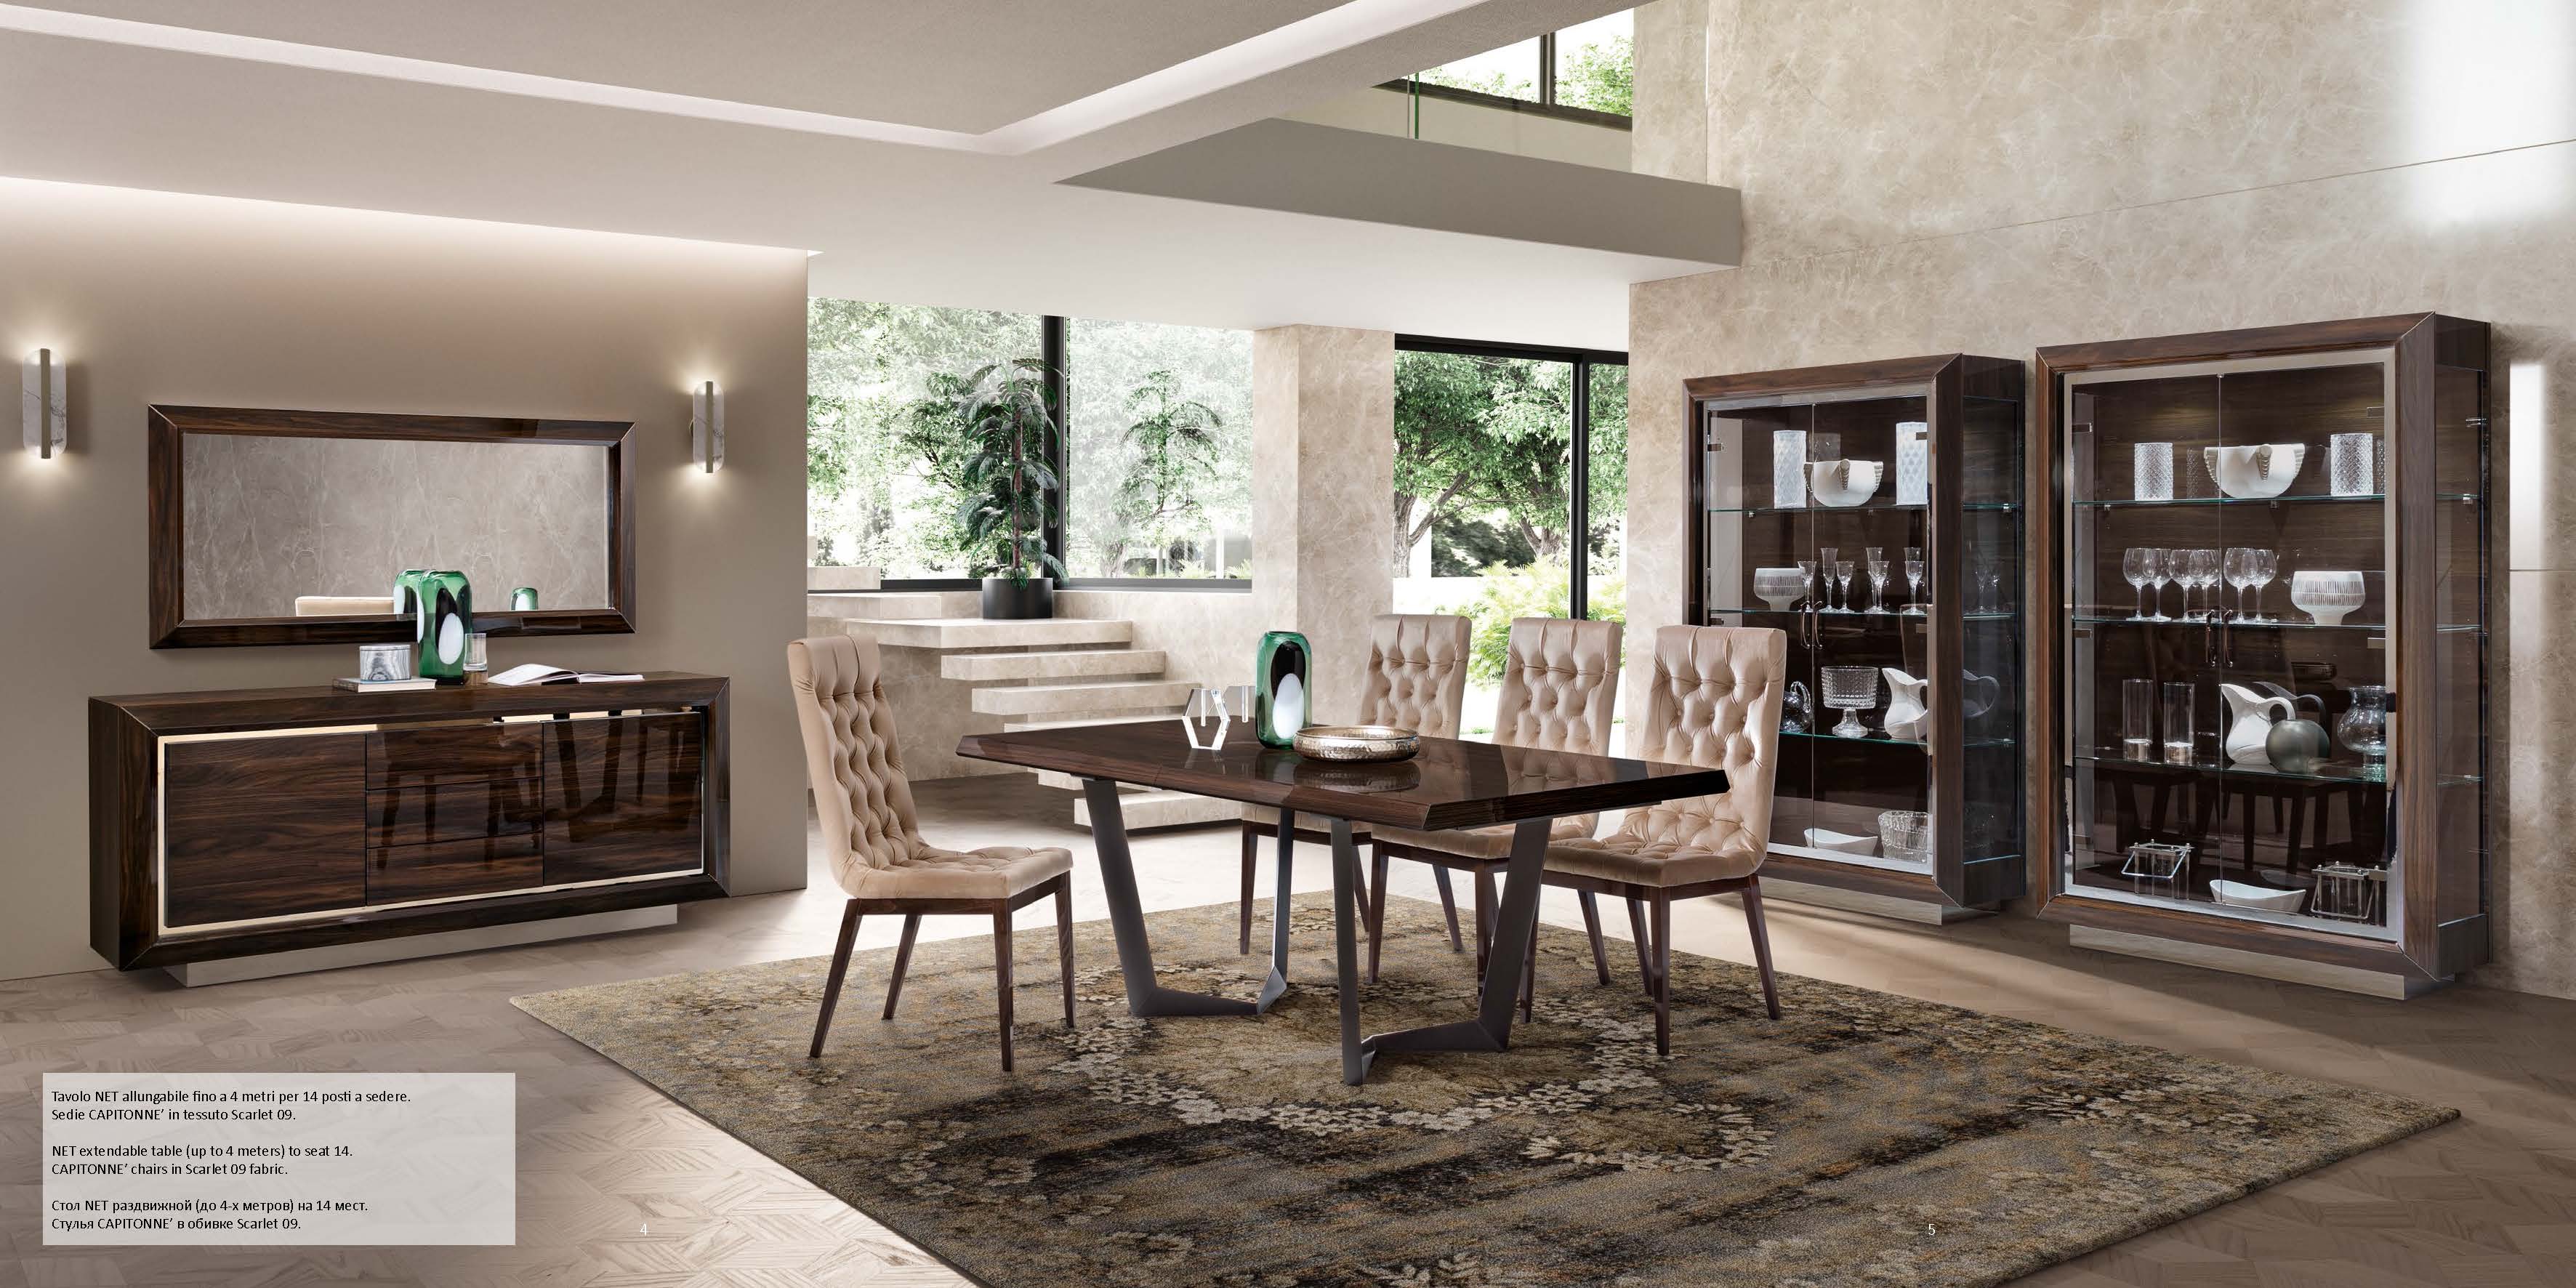 Dining Room Furniture Modern Dining Room Sets Elite Day Walnut Dining Additional items